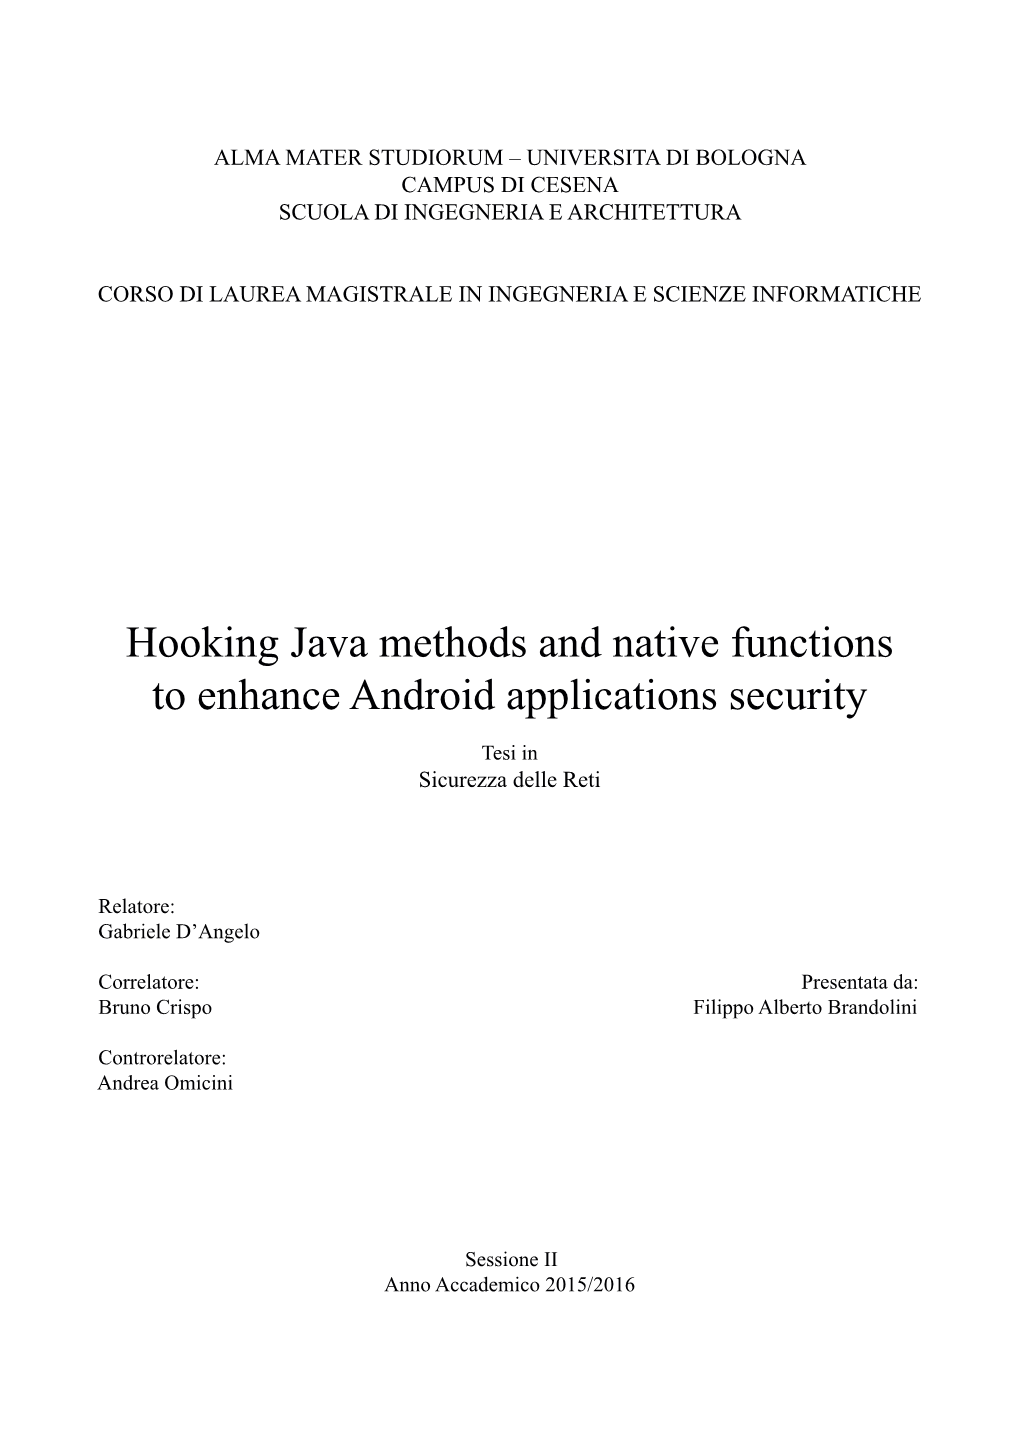 Hooking Java Methods and Native Functions to Enhance Android Applications Security